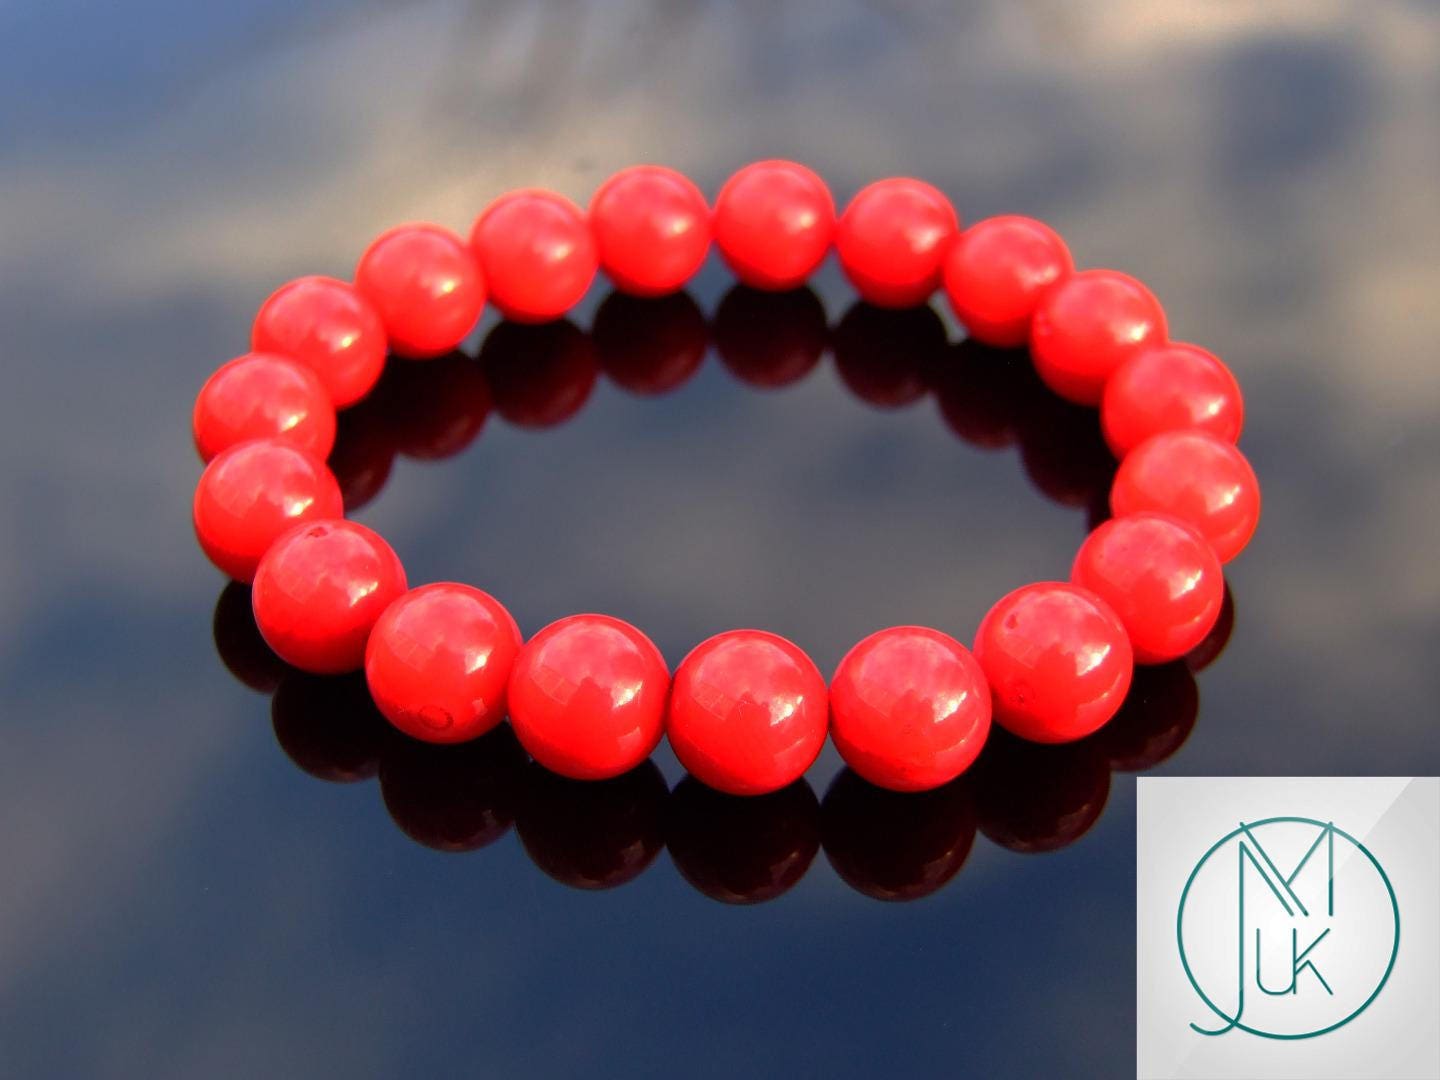 8mm natural red coral beads bracelet men bracelet women bracelet stretch  bracelet Gift for Men Gift for Him Her Gift for WomenChristmas